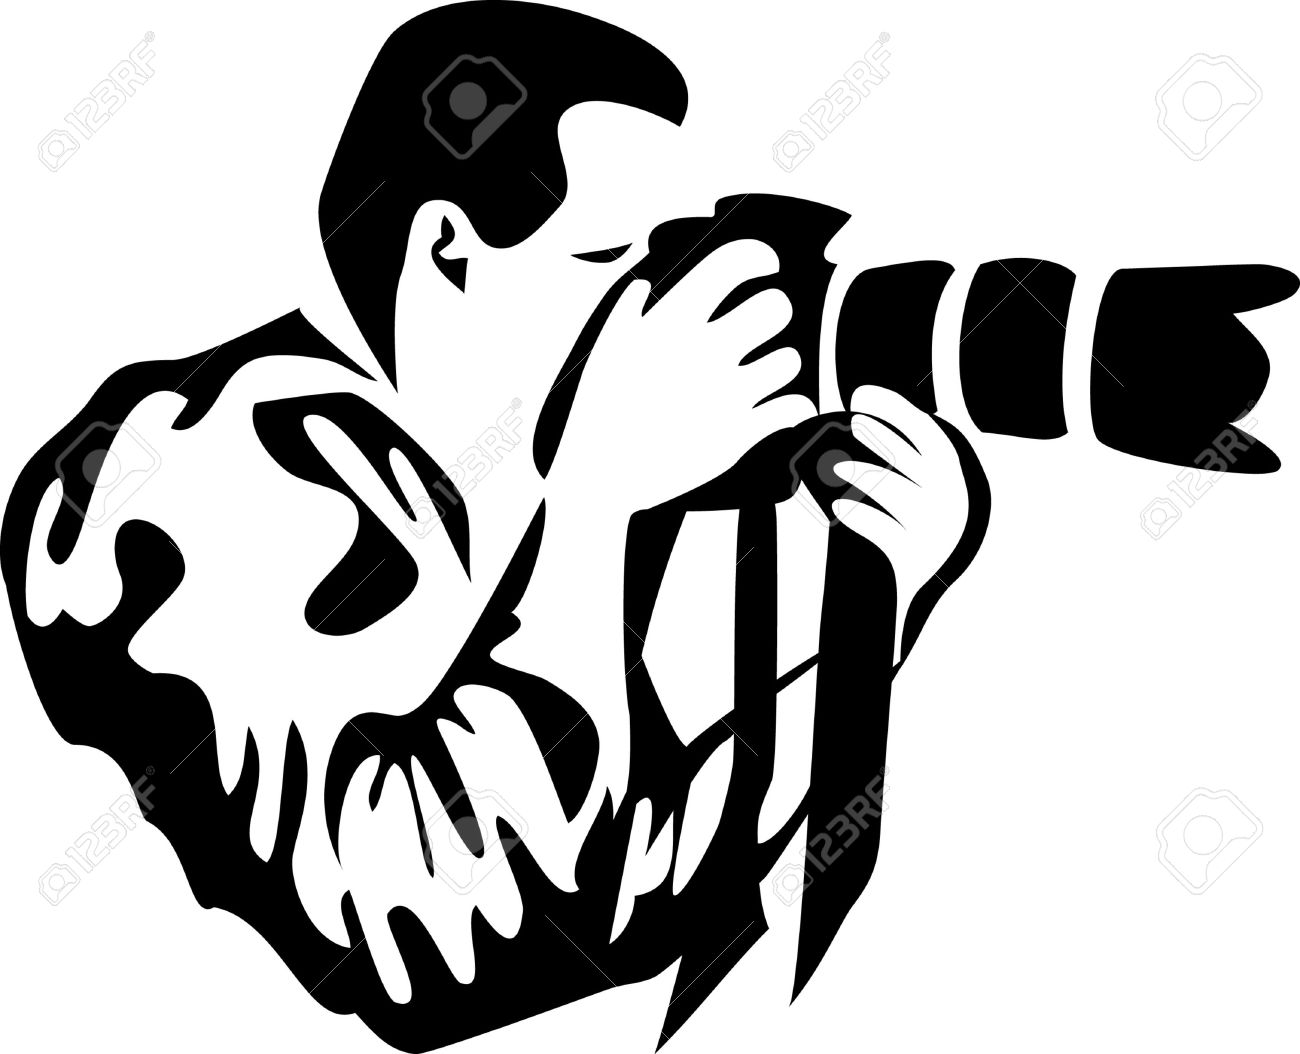 1402 Photographer free clipart.